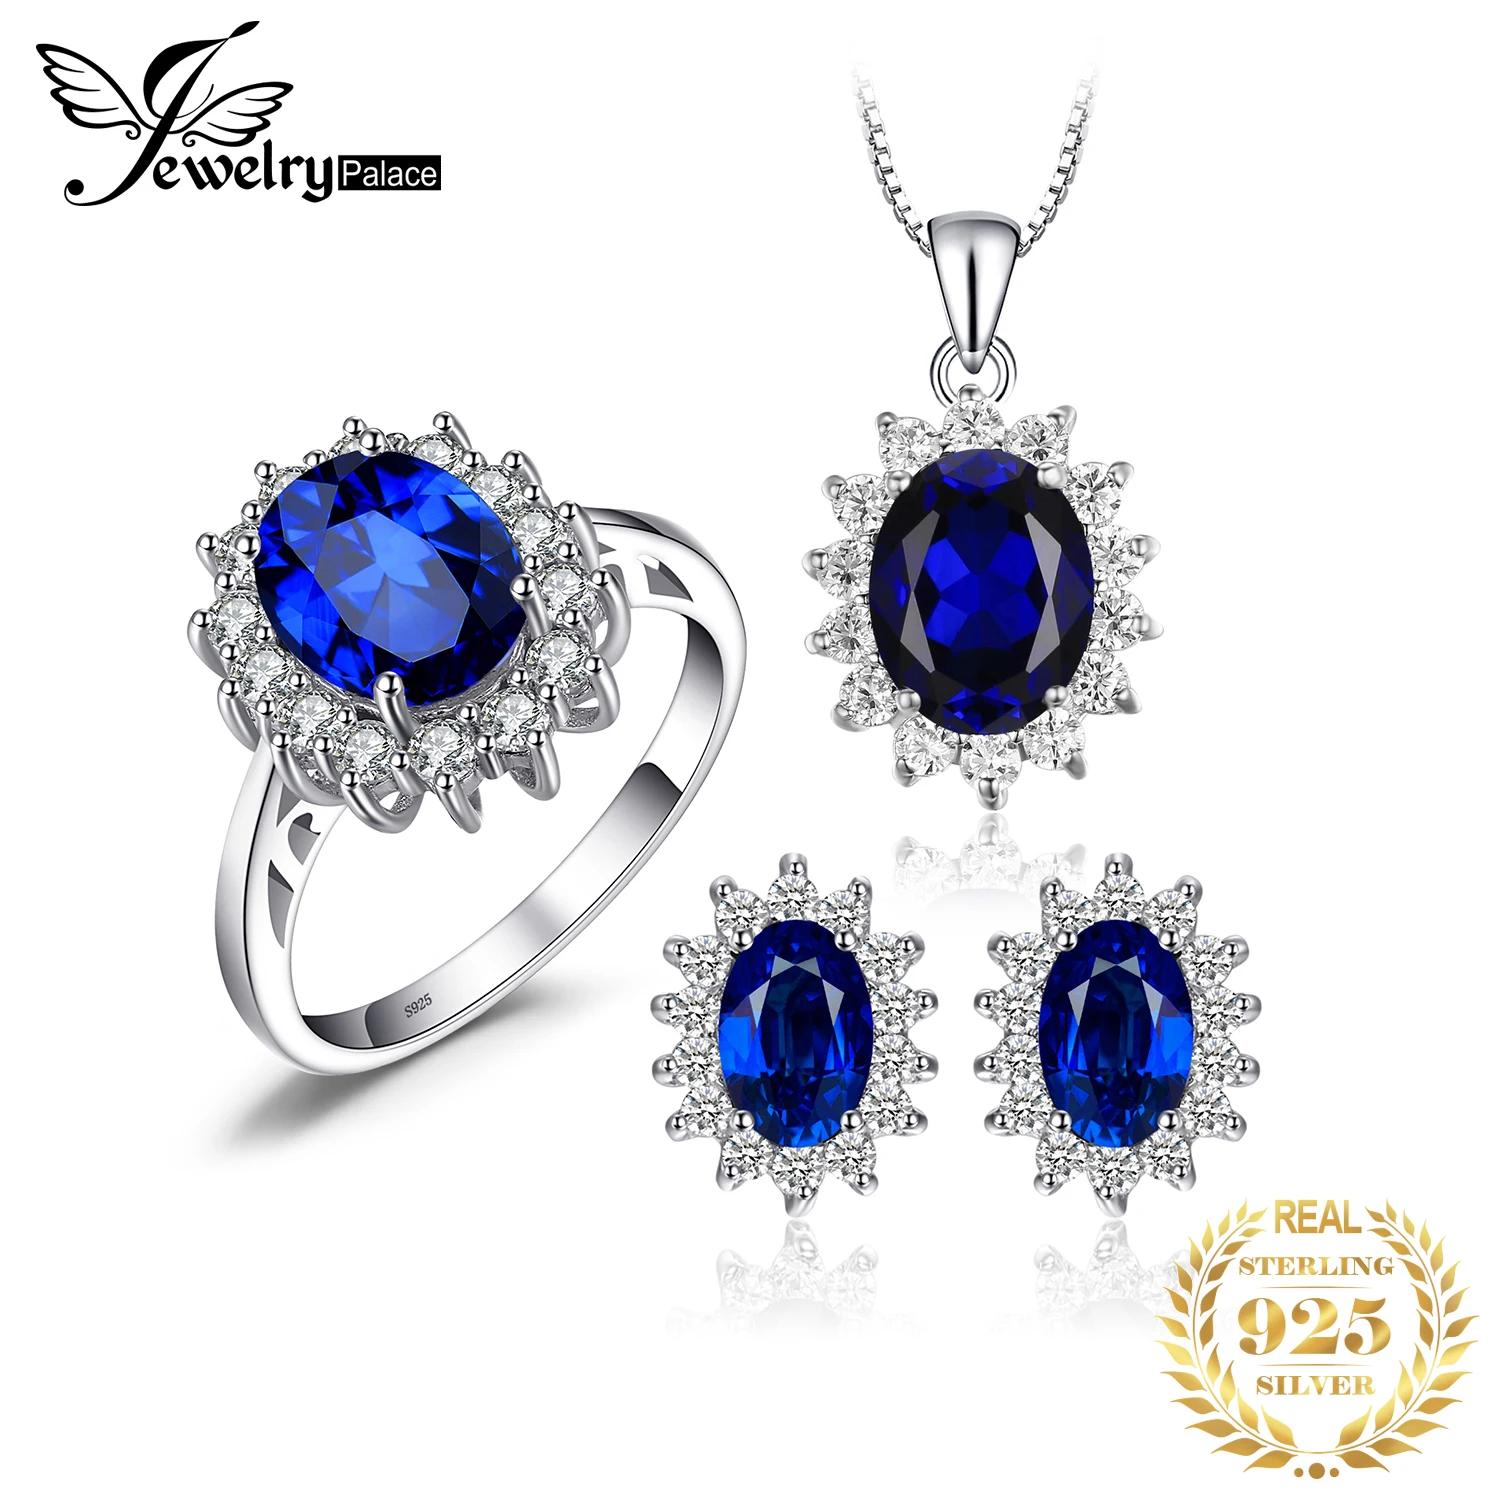 JewelryPalace Princess Diana Created Blue Sapphire Ring Pendant Necklace Stud Earrings Crown 925 Sterling Silver Jewelry Set